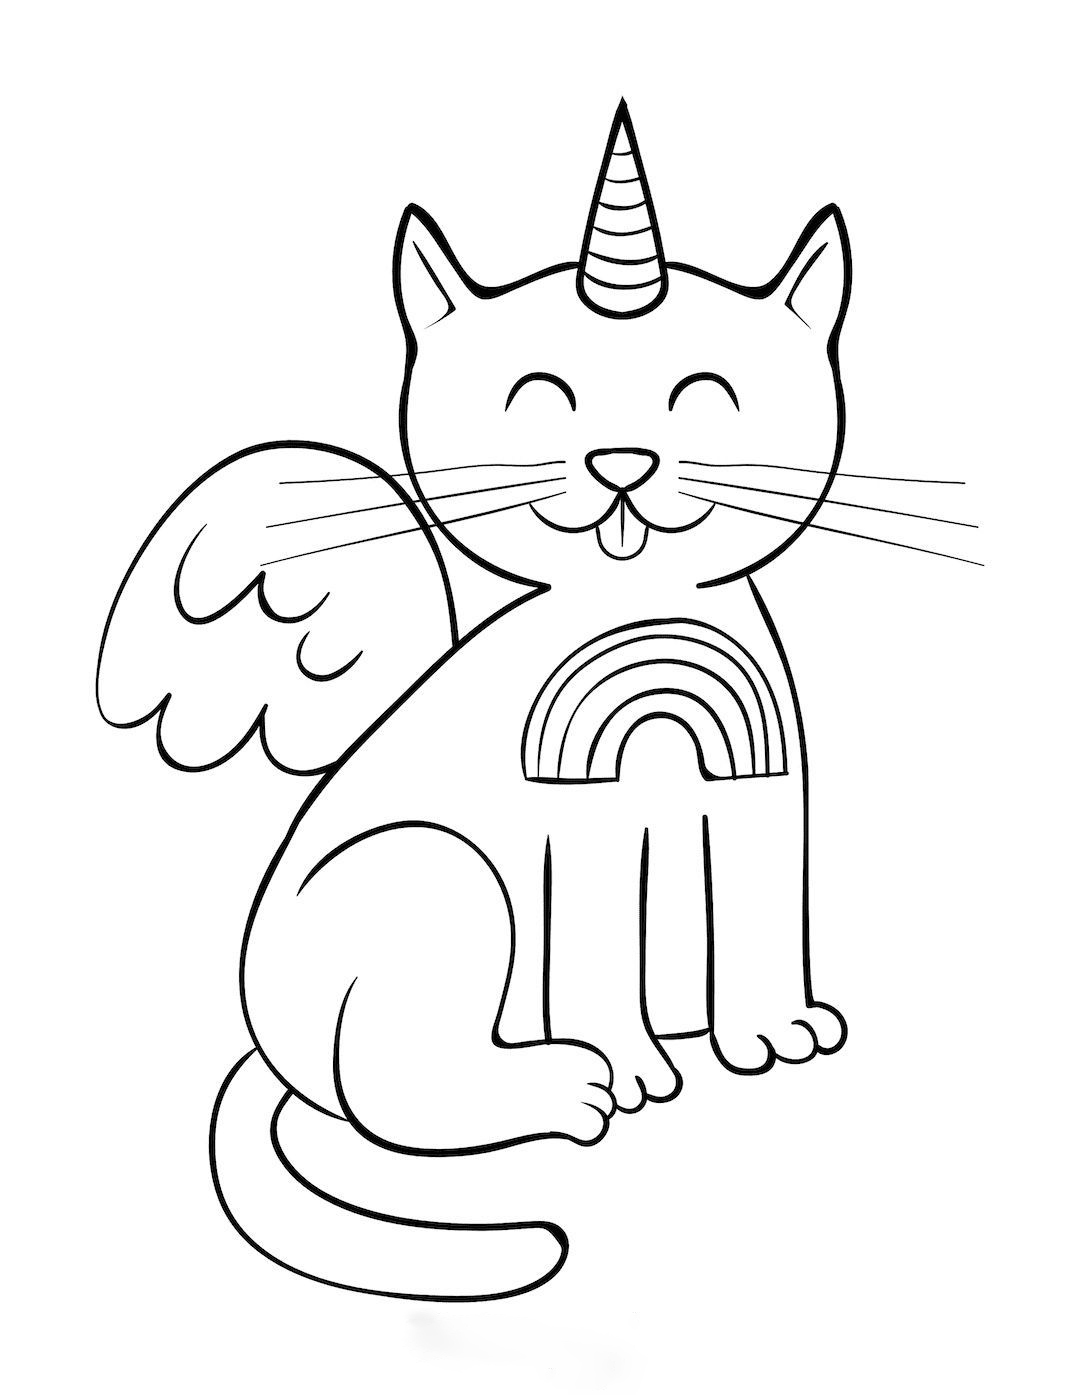 Unicorn Cat with wings Coloring Pages - Unicorn Cat Coloring Pages - Coloring  Pages For Kids And Adults